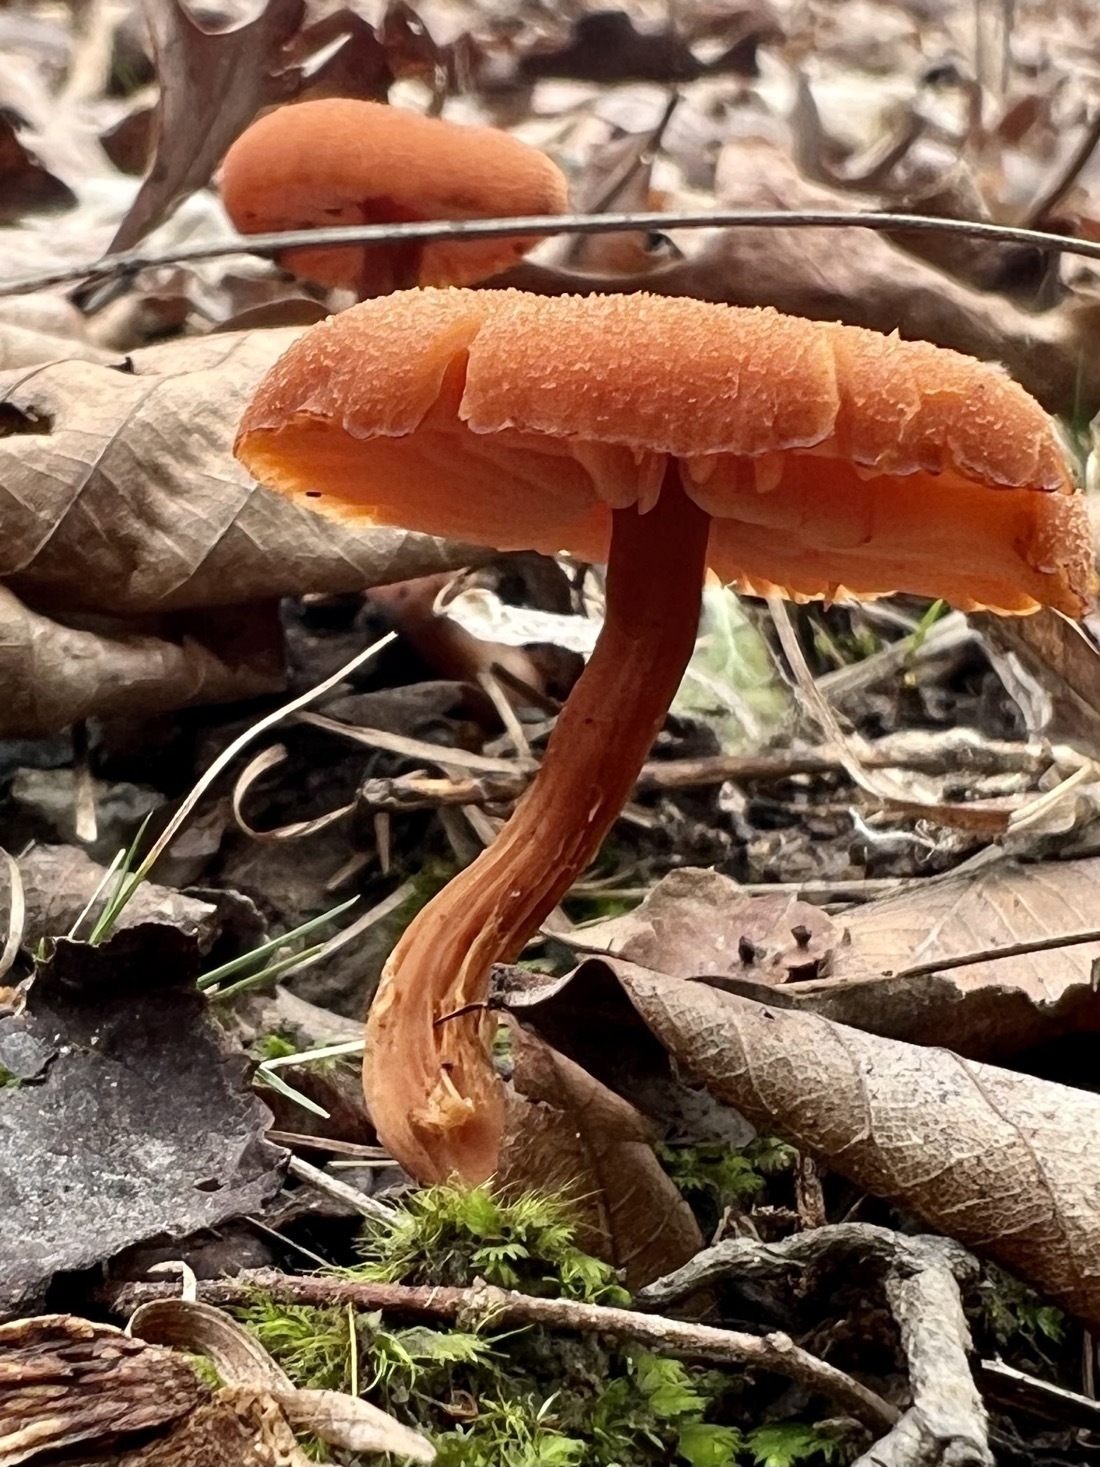 A distinct dark orange mushroom growing out of the ground with moss in forground and leaves all around